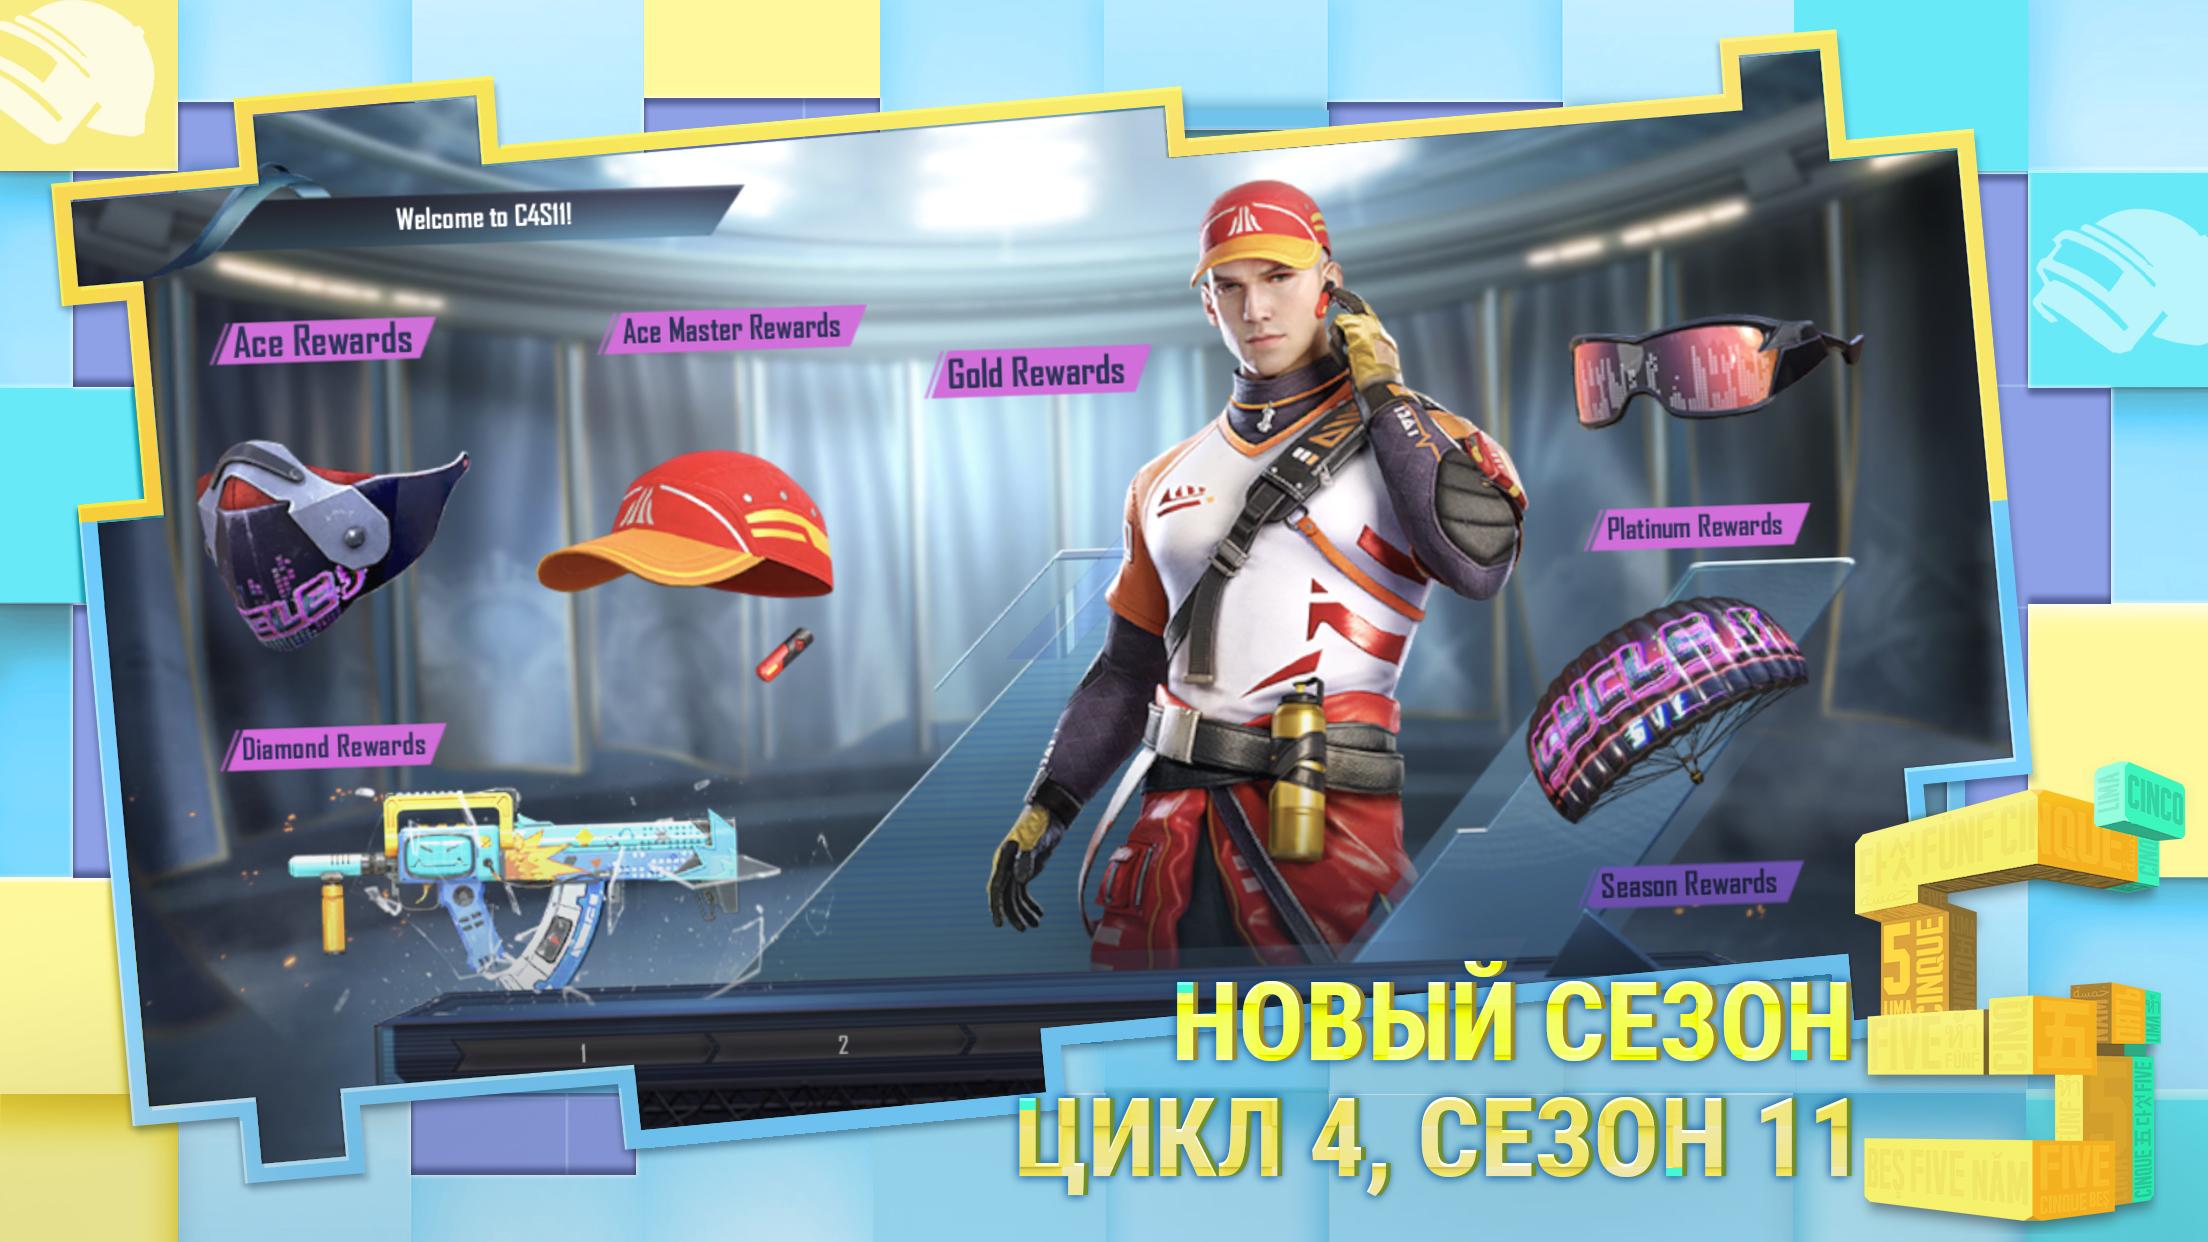 Download failed because you may not have purchased this app pubg mobile что делать фото 73